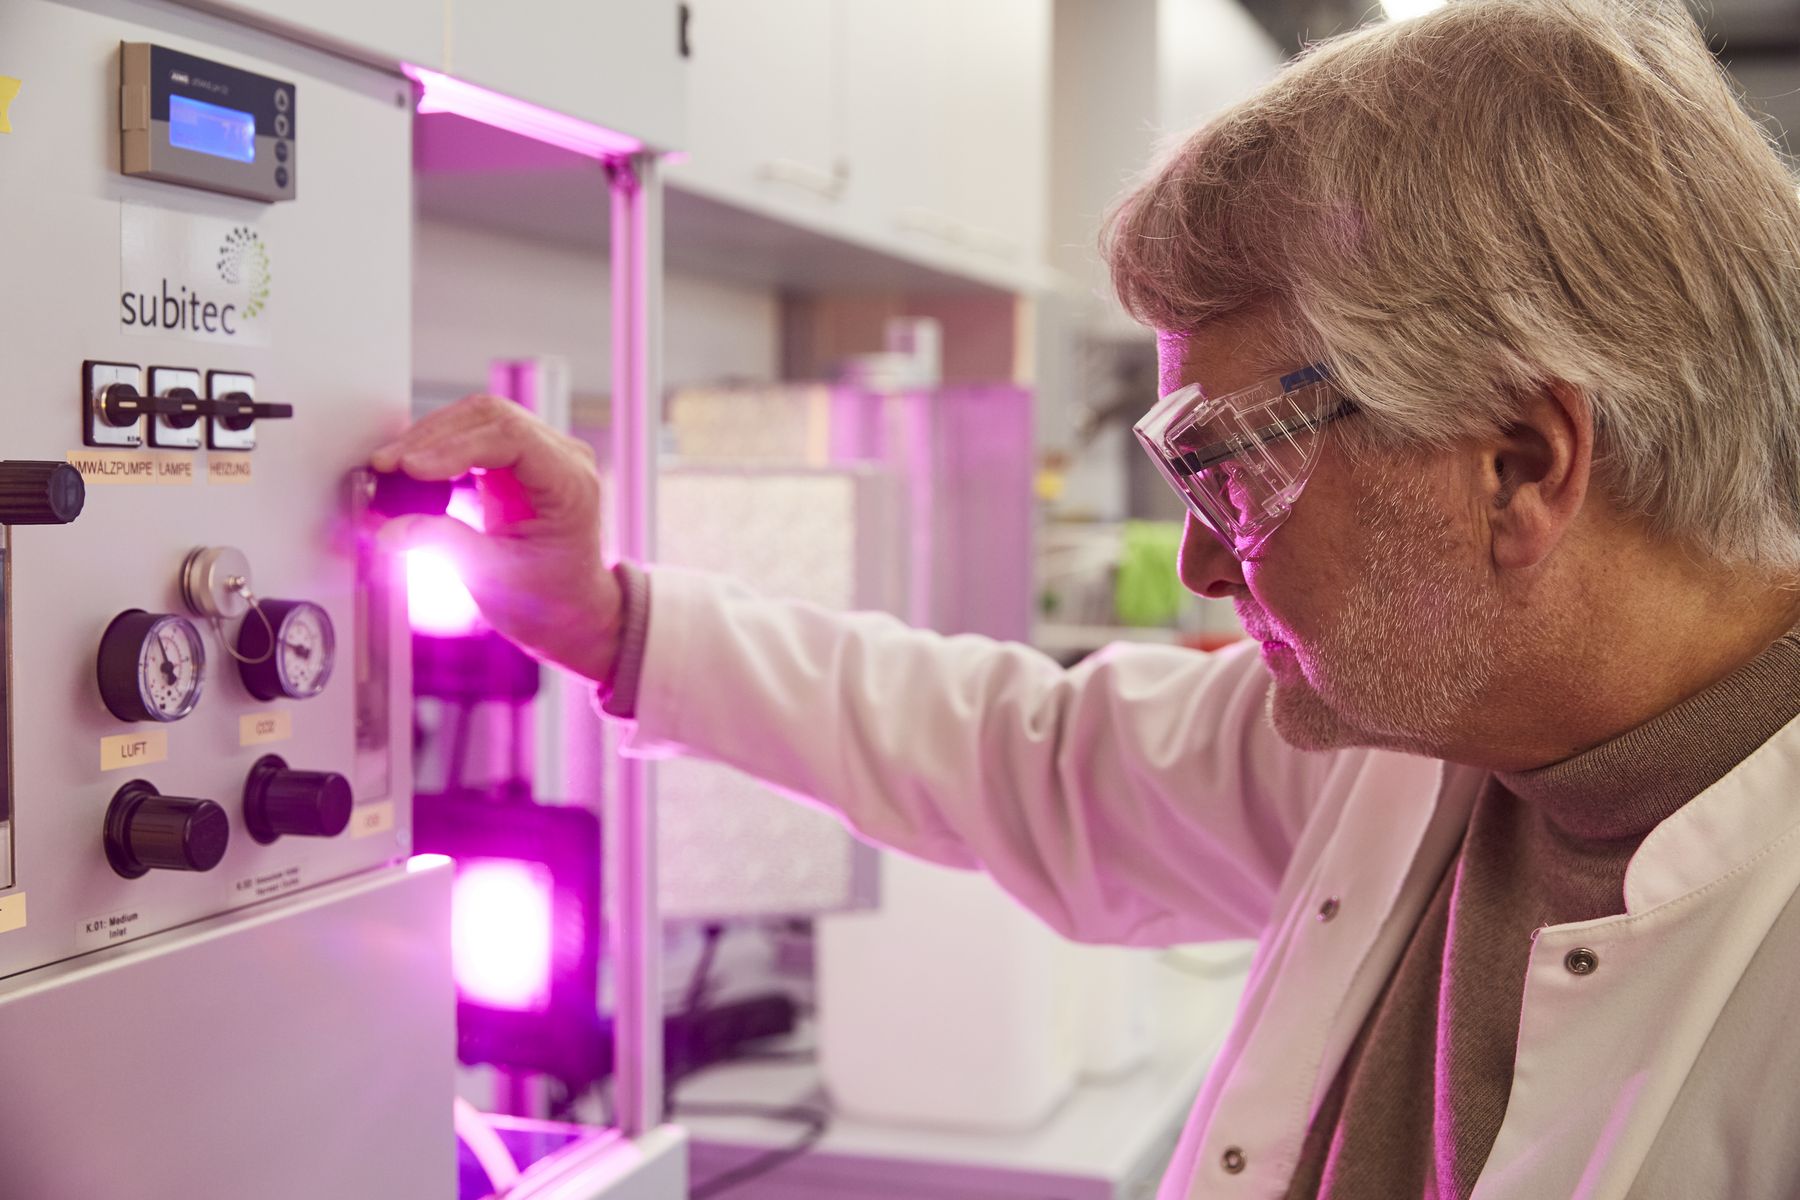 Prof. Pollet taking a close look at a smaller reactor bathed in purple light